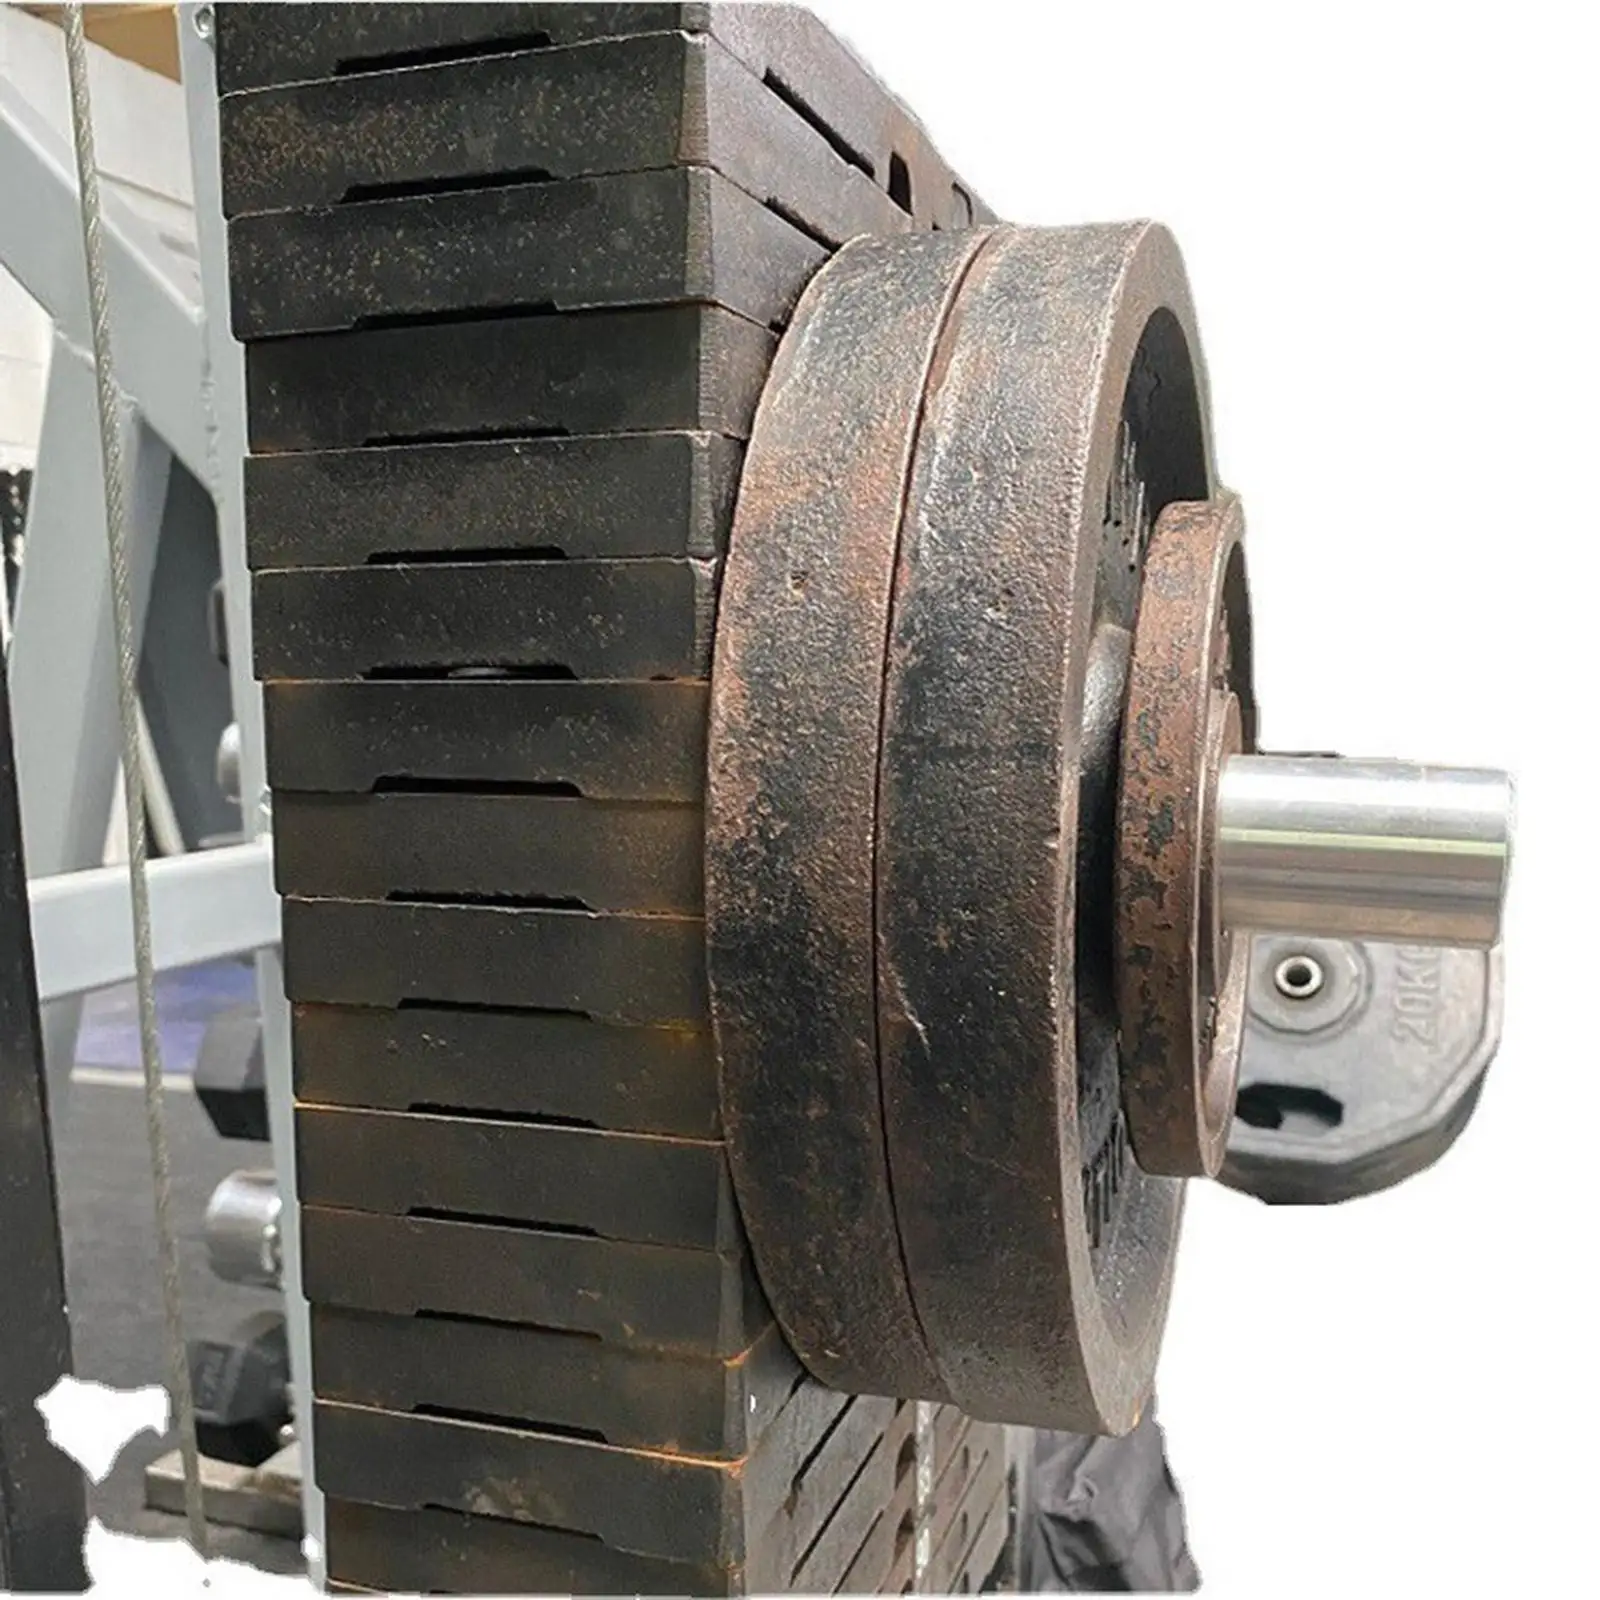 Gym Weight Stack Extender Exercise Machine Weight Lifting Weight Loading Pin Weight Plate Sports Board Dumbbell Accessories